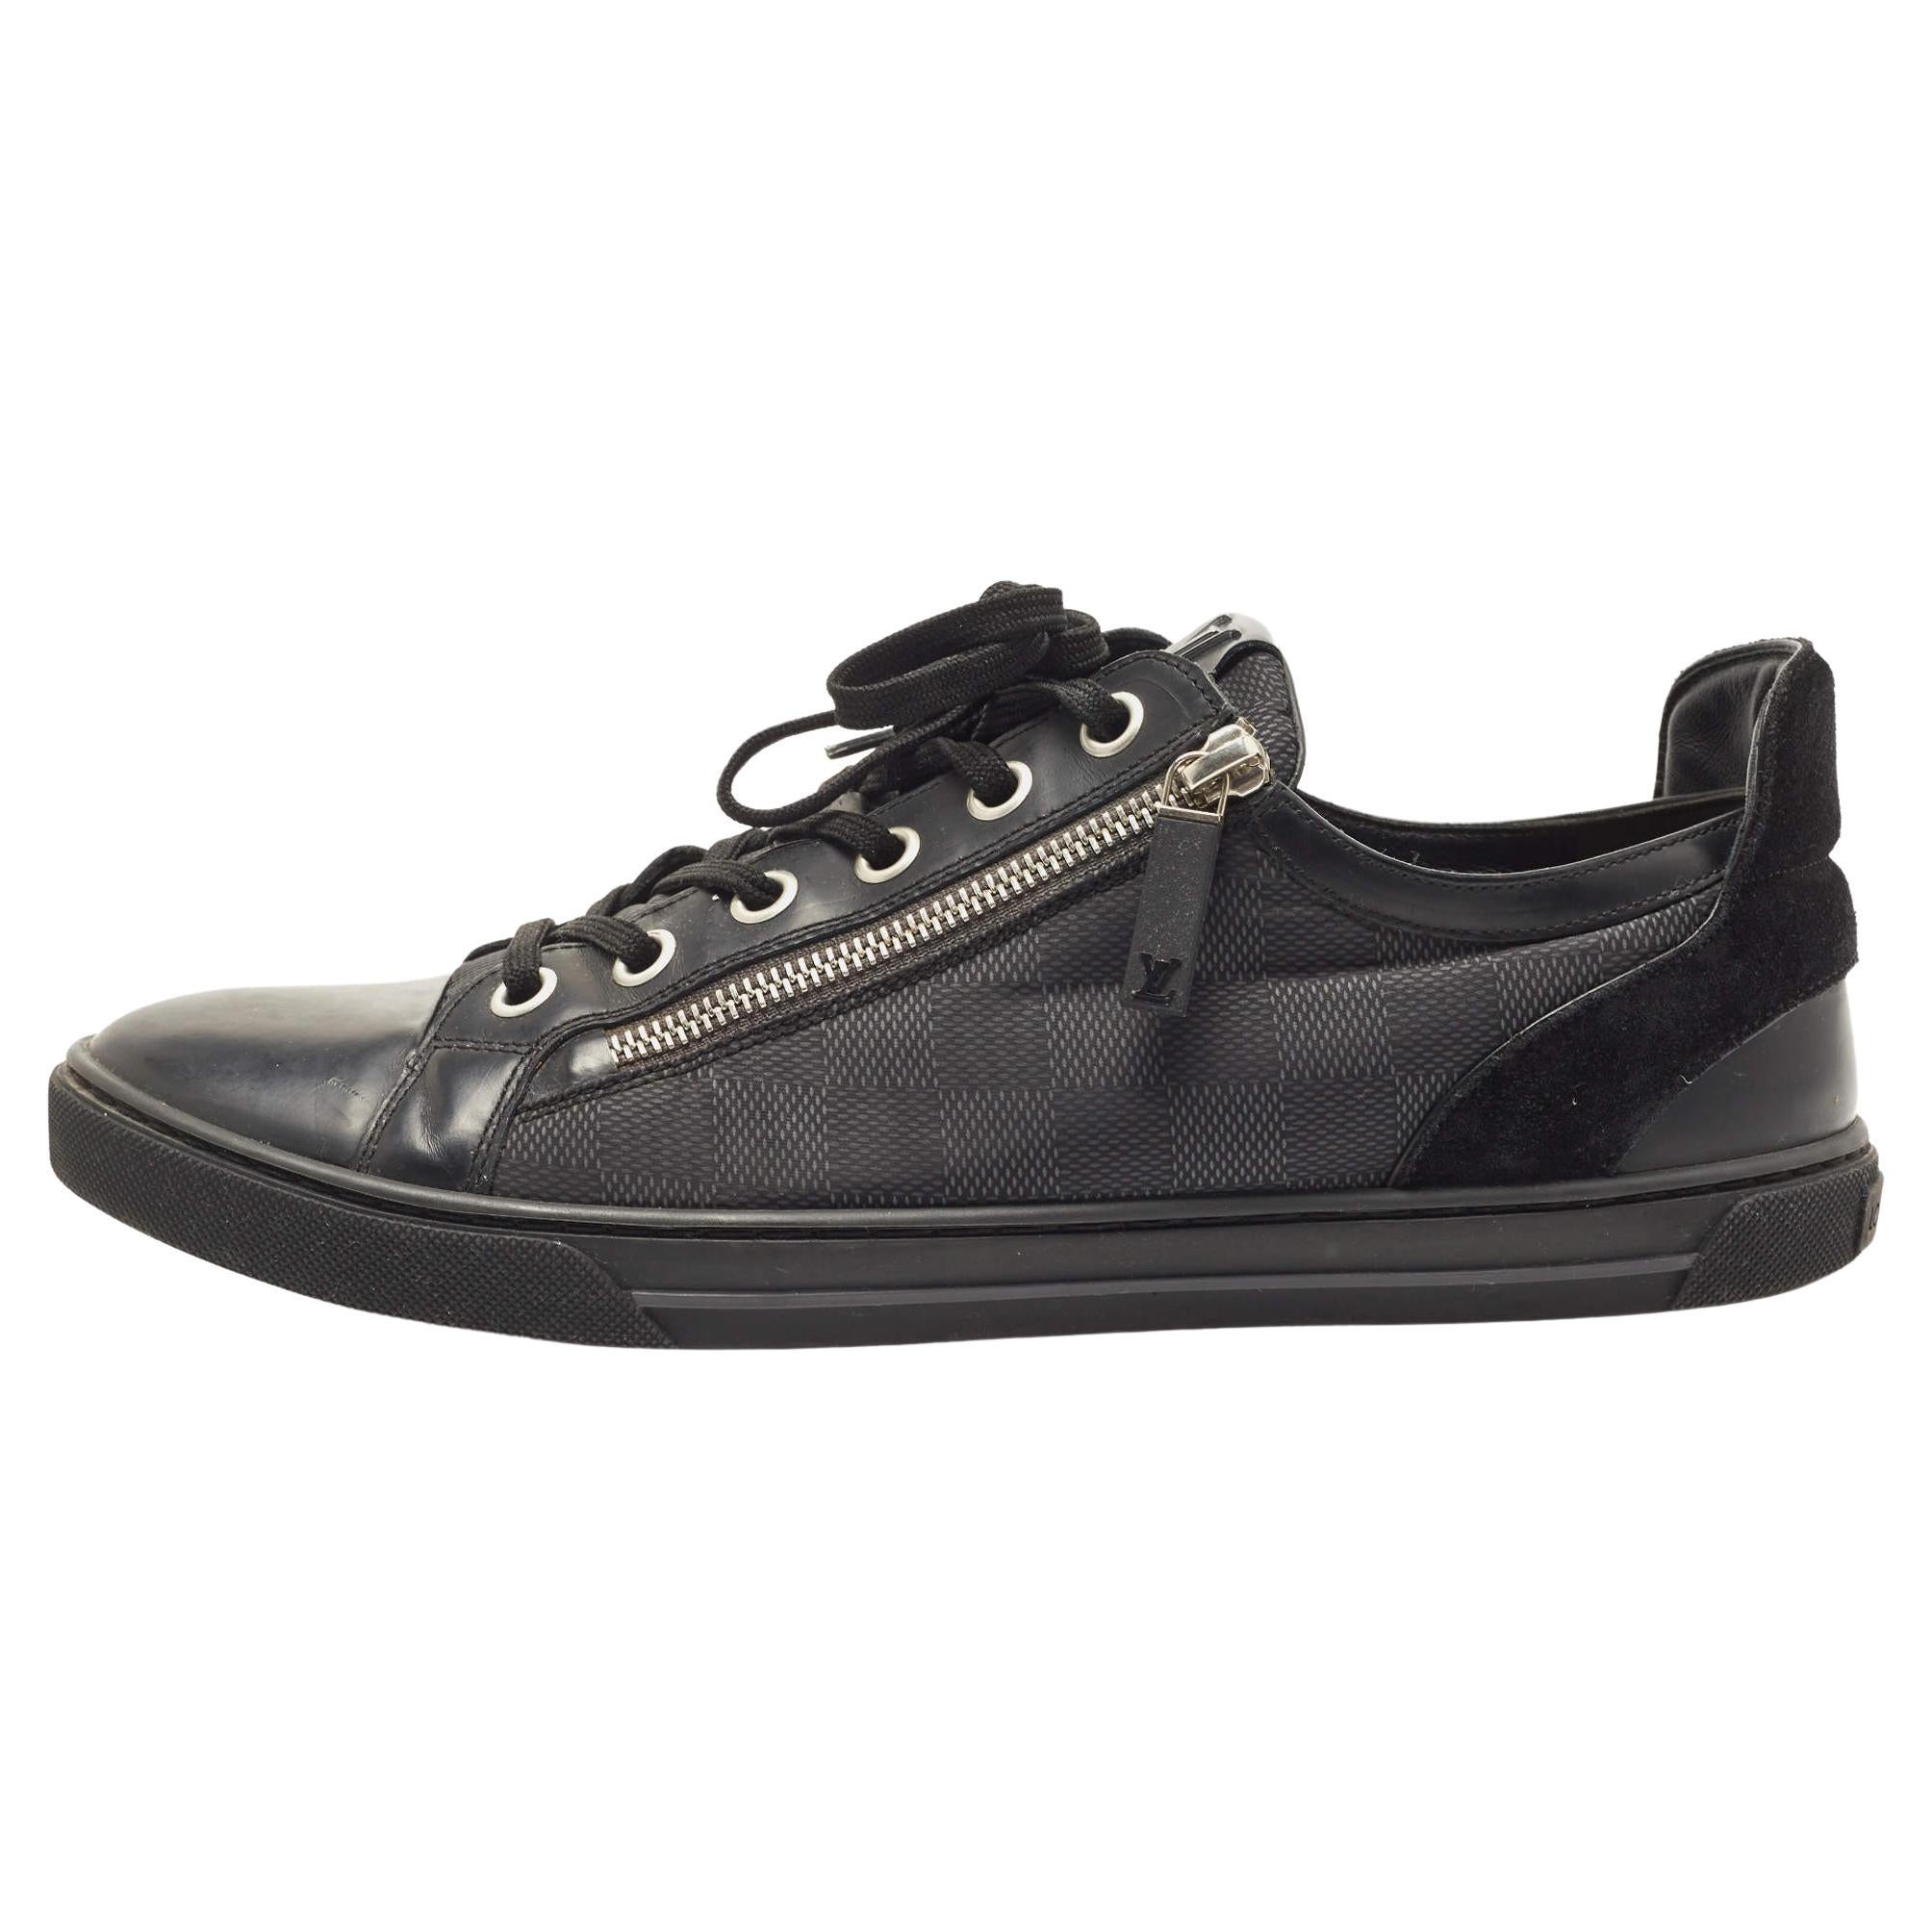 Louis Vuitton Black Leather and Damier Ebene Canvas Low Top Sneakers Size 42.5 For Sale